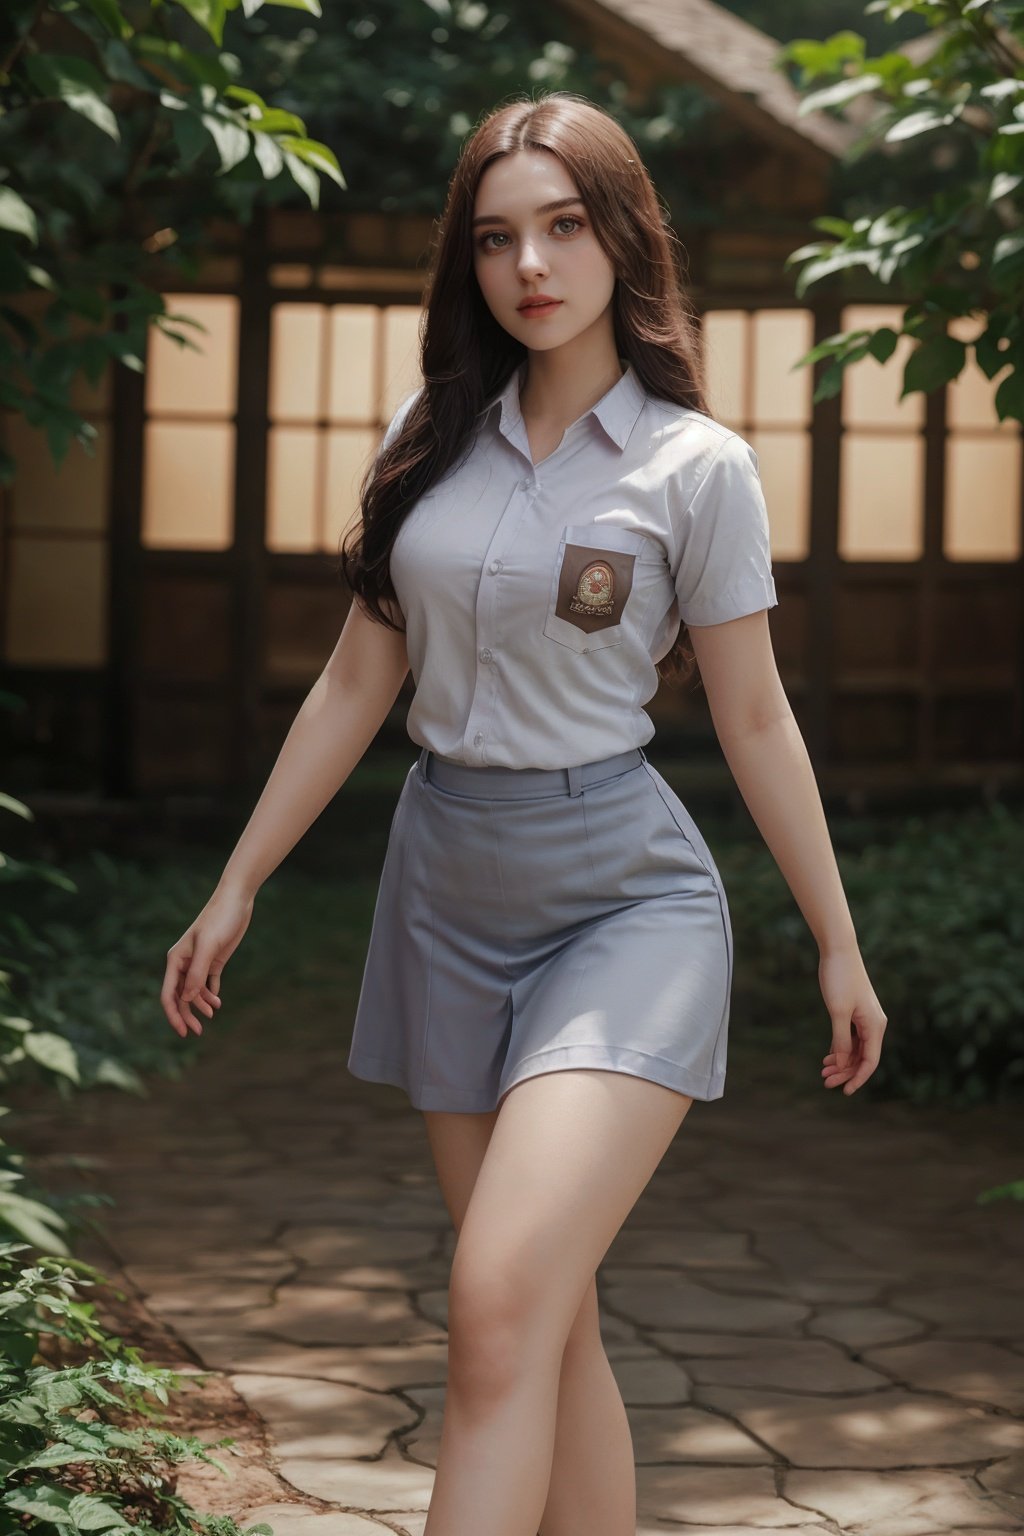 Hyperrealistic art cinematic photo ethereal fantasy concept art of sm4c3w3k, white clothes,full body  photo of the most beautiful bukub woman in the world wearing the sm4c3w3k, collared shirt,short sleeves, grey skirt, pocket,beautiful face,detail face,<lora:sm4c3w3k-05:0.8>  . magnificent, celestial, ethereal, painterly, epic, majestic, magical, fantasy art, cover art, dreamy . 35mm photograph, film, bokeh, professional, 4k, highly detailed . Extremely high-resolution details, photographic, realism pushed to extreme, fine texture, incredibly lifelike